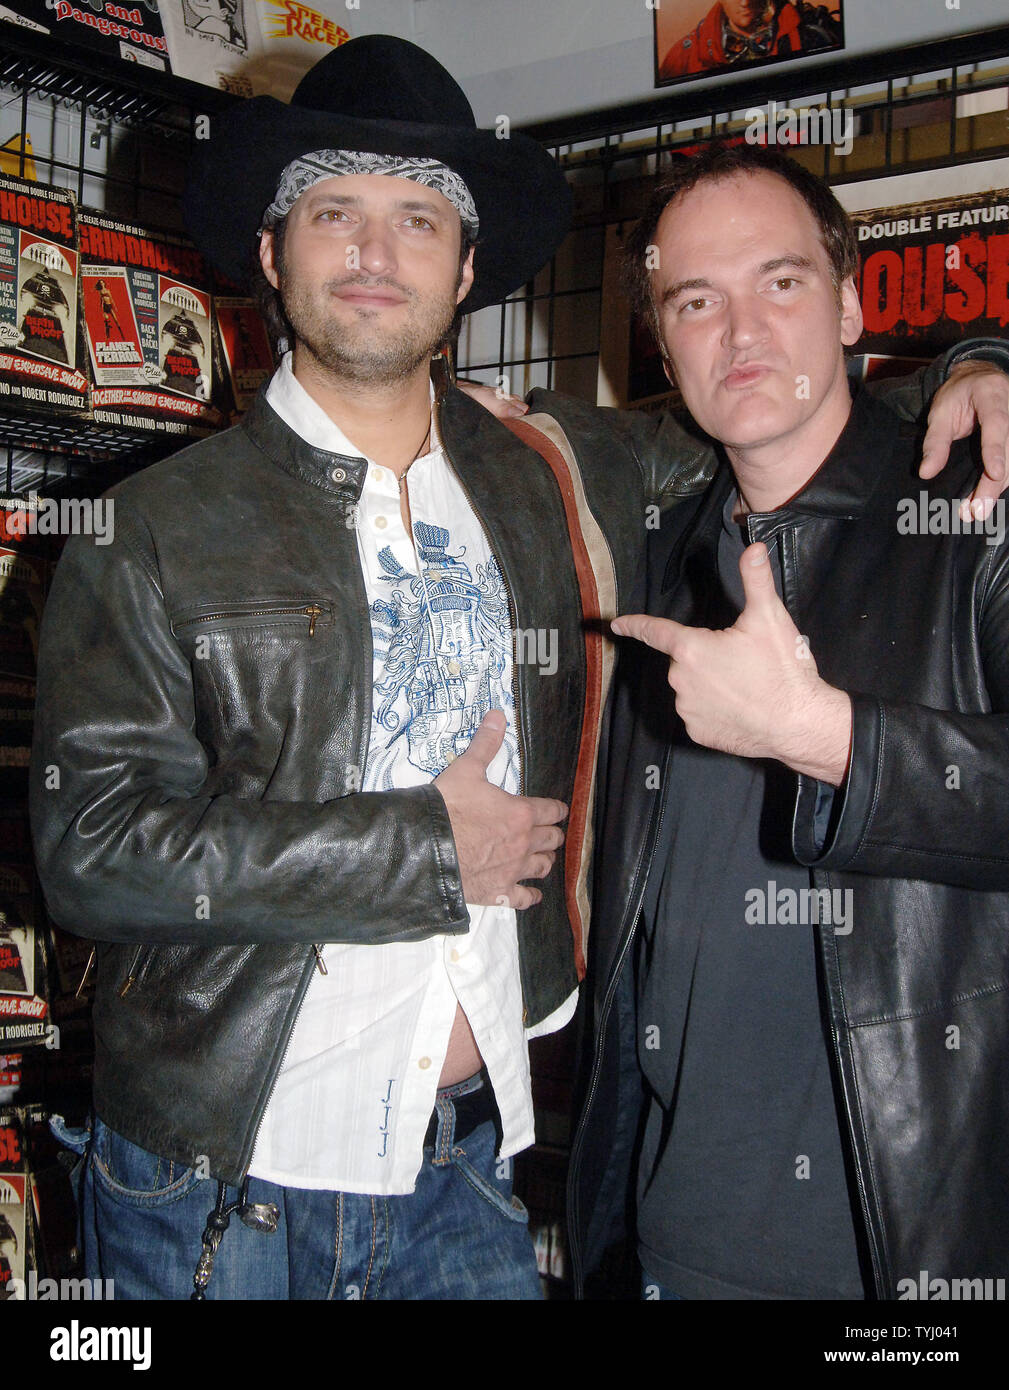 Director Robert Rodriguez (L) and actor-director Quentin Tarantino pose at Hanley's Universe  book store while signing copies of their book based on their new film 'GrindHouse' on March 31, 2007 in New York.  (UPI Photo/Ezio Petersen) Stock Photo